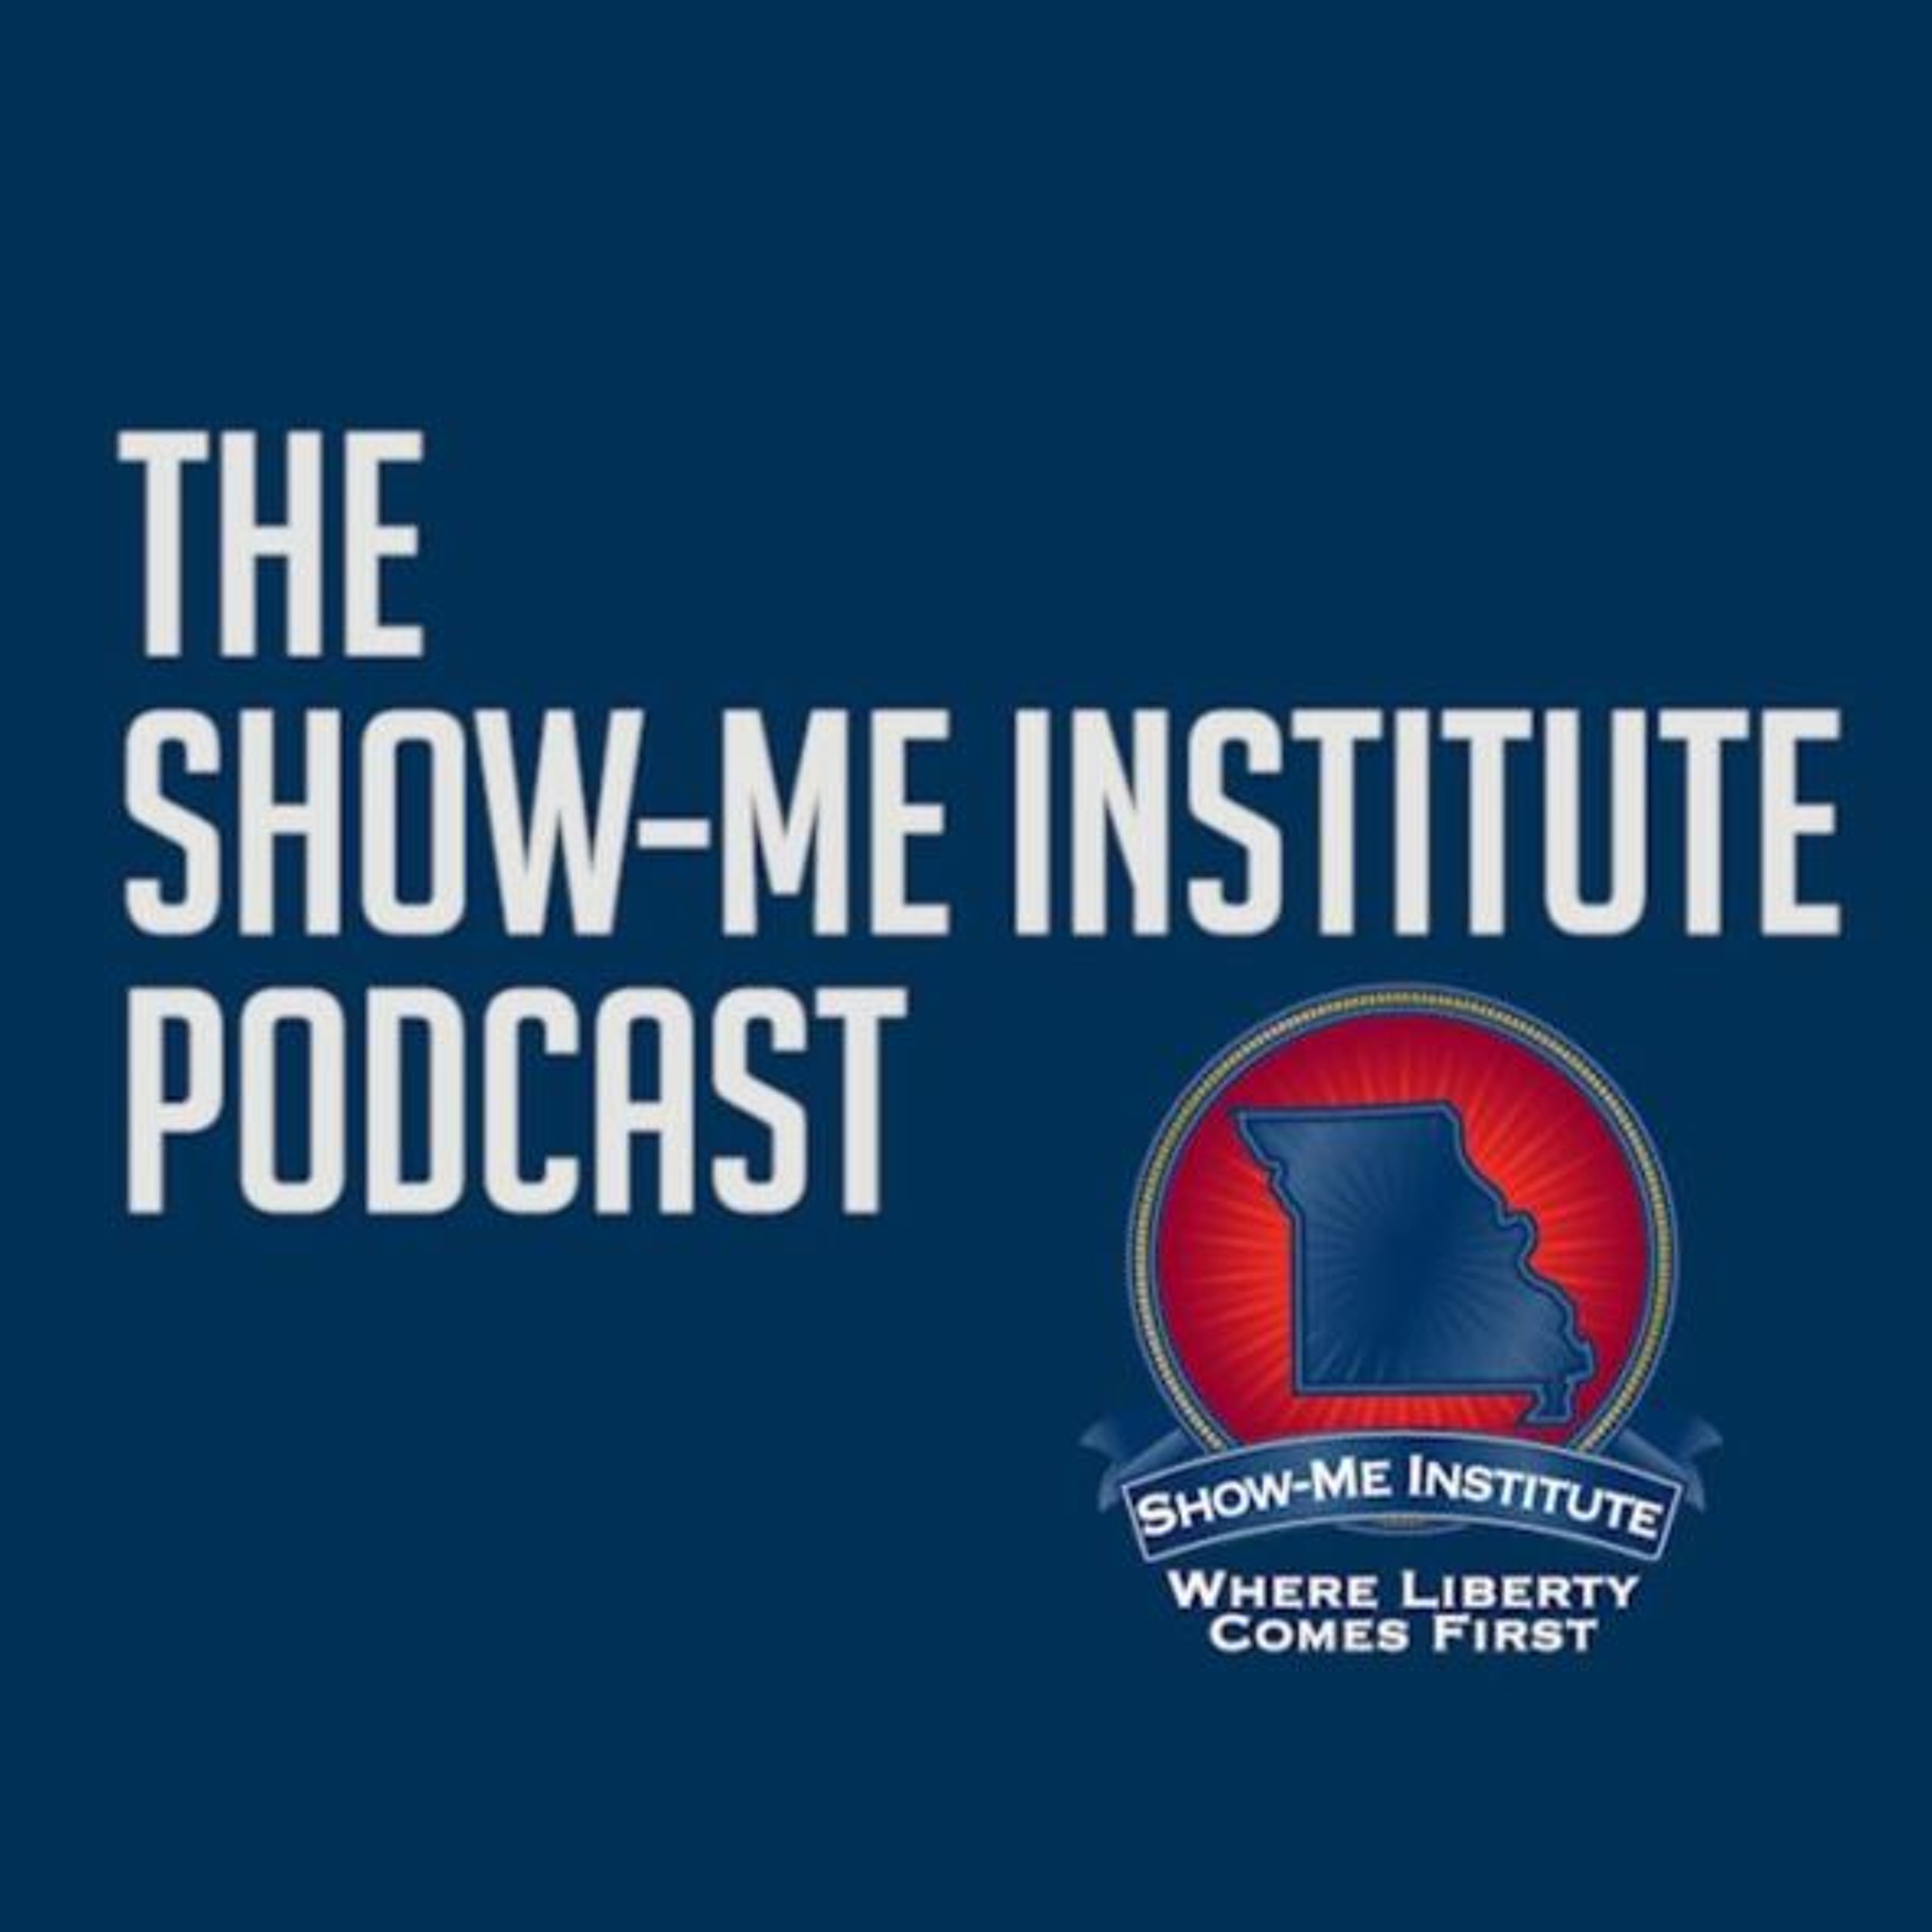 SMI Podcast: A Road Map For Education Reform - Bill Mattox